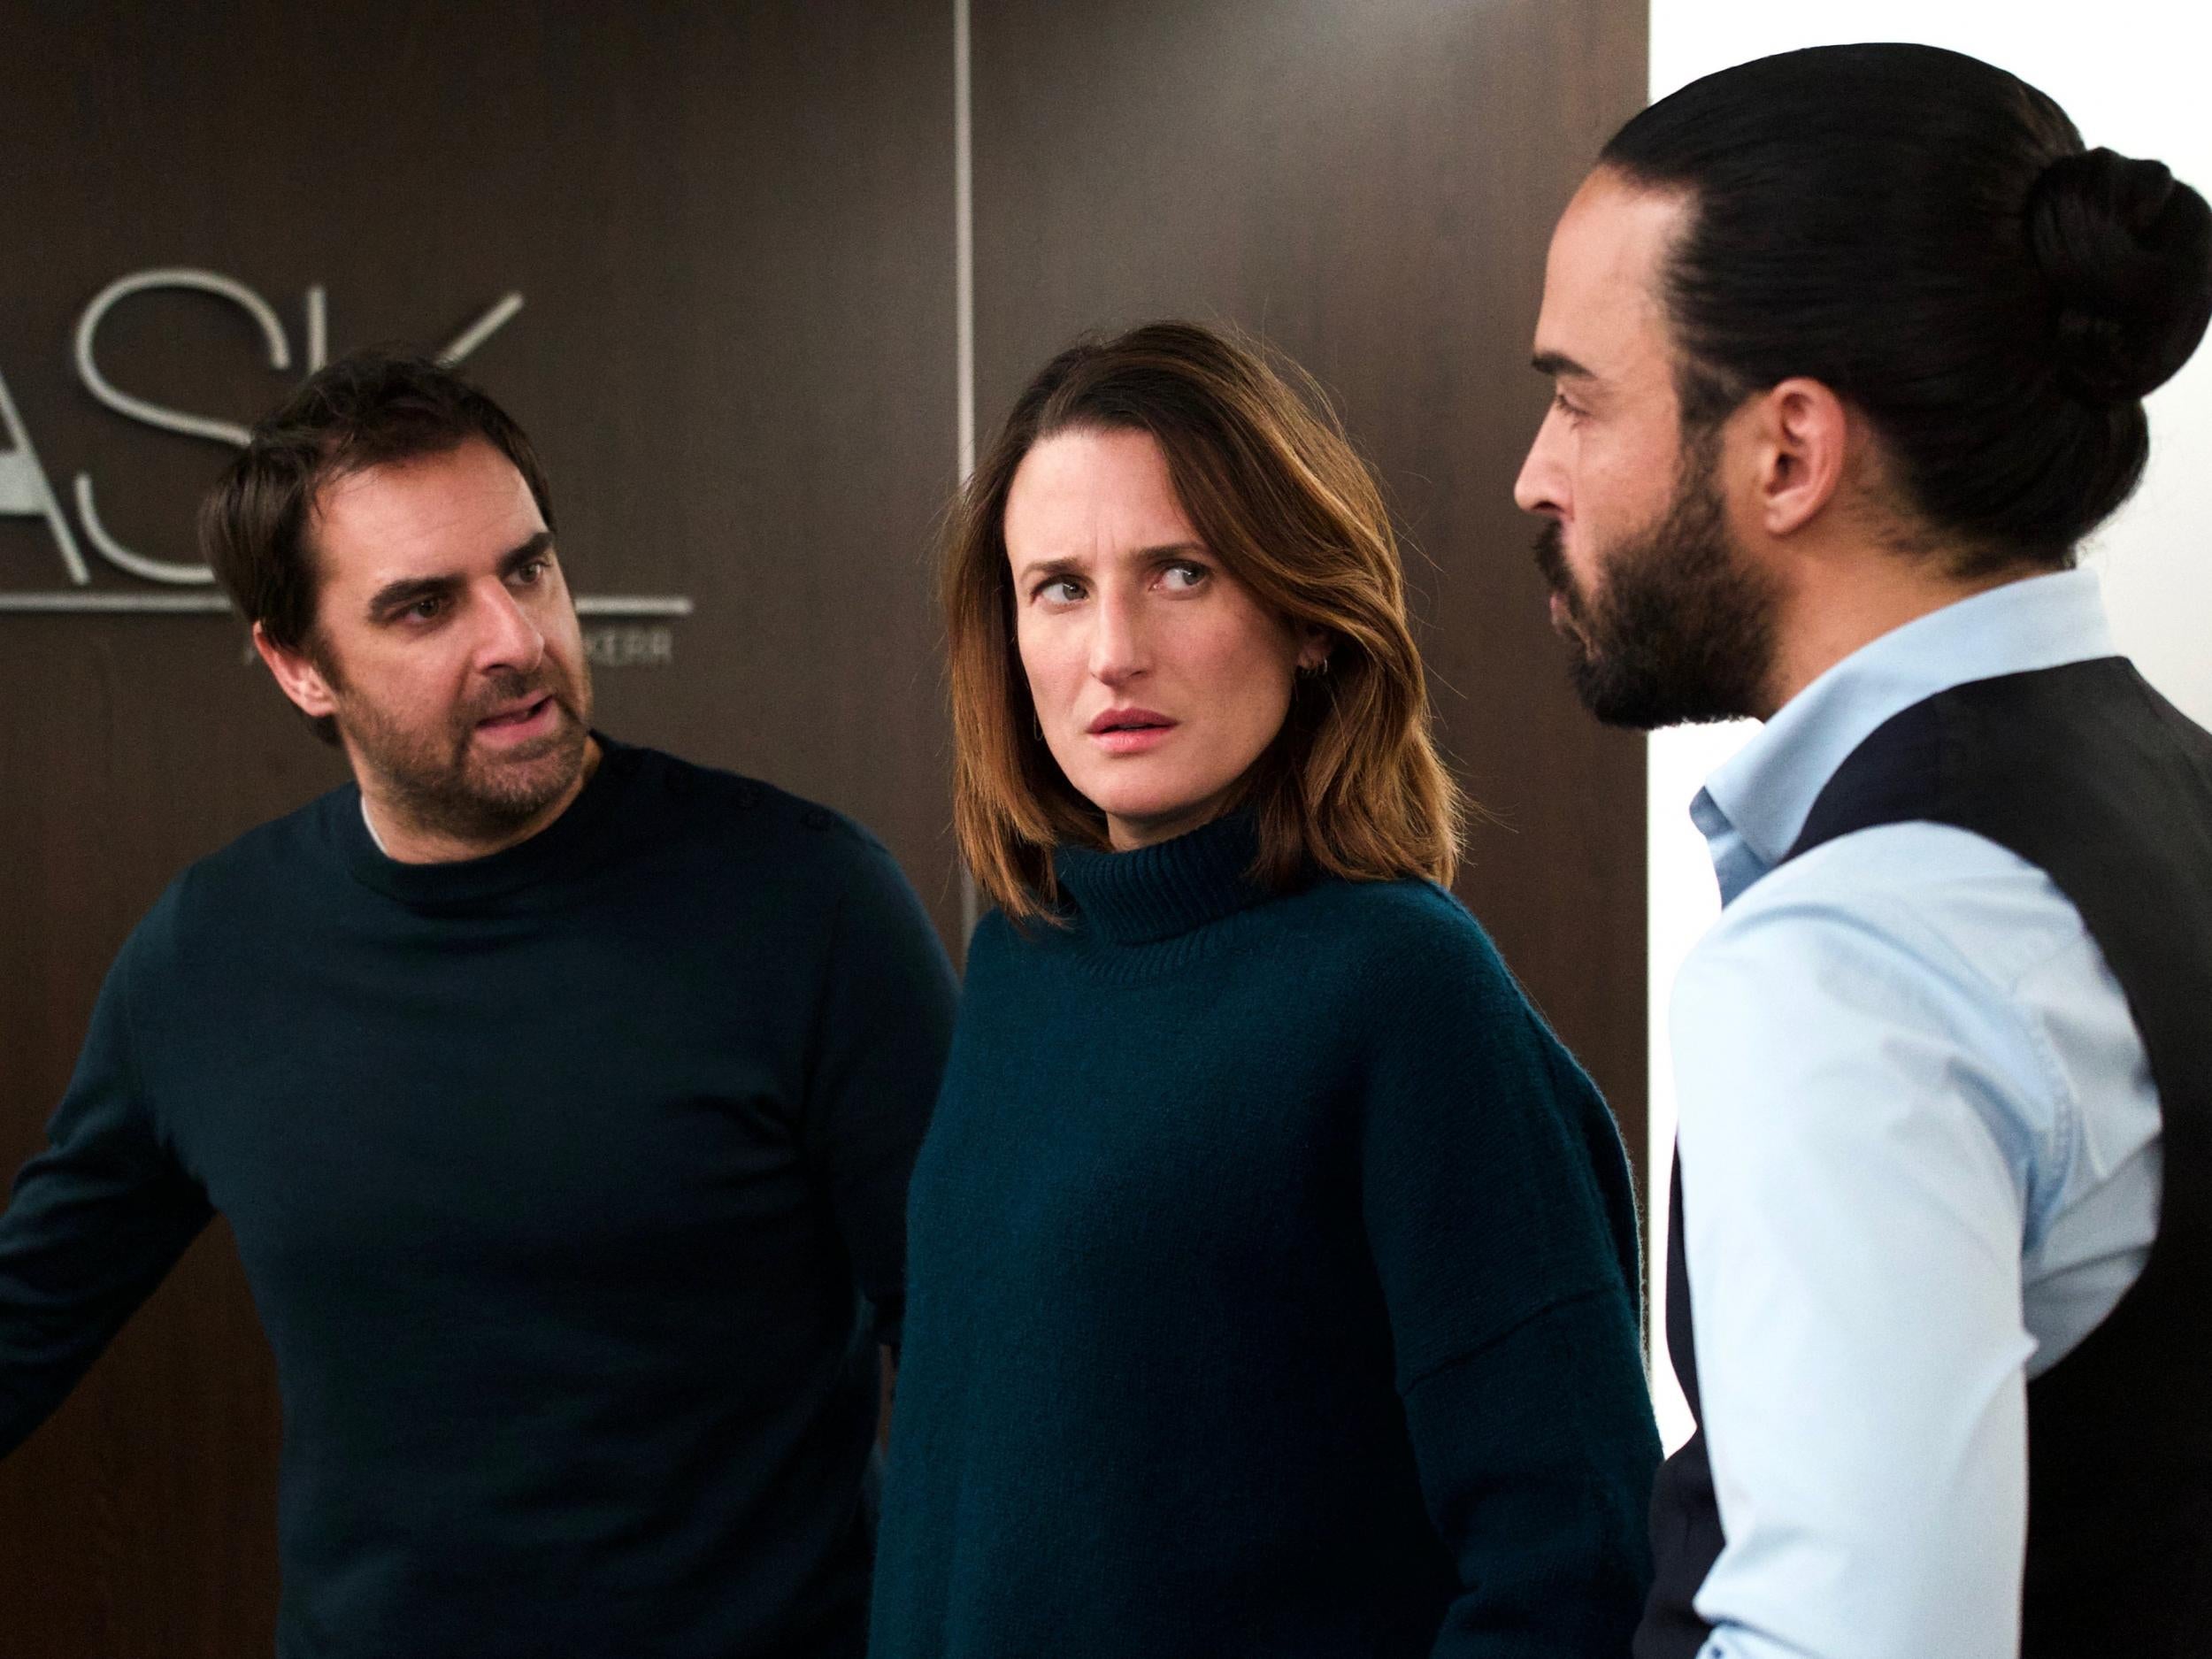 Grégory Montel, Camille Cottin and Assaad Bouab in ‘Call My Agent!’